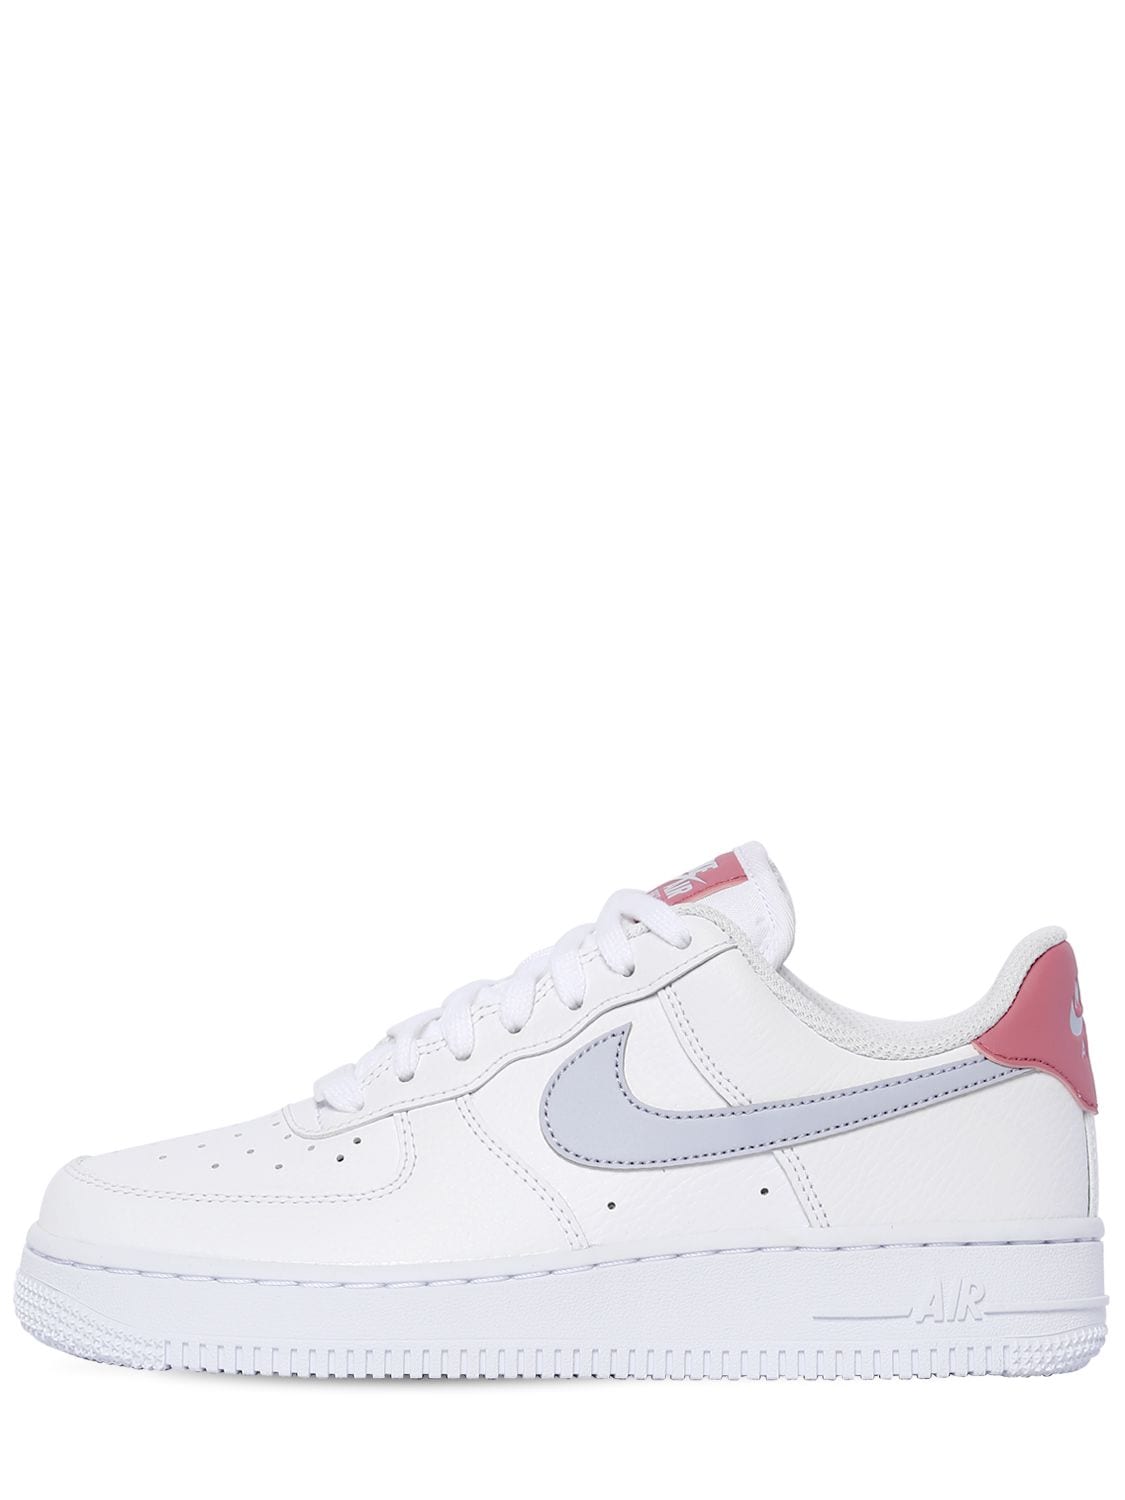 Nike Air Force 1 '07 Ess Sneakers In White,ghost